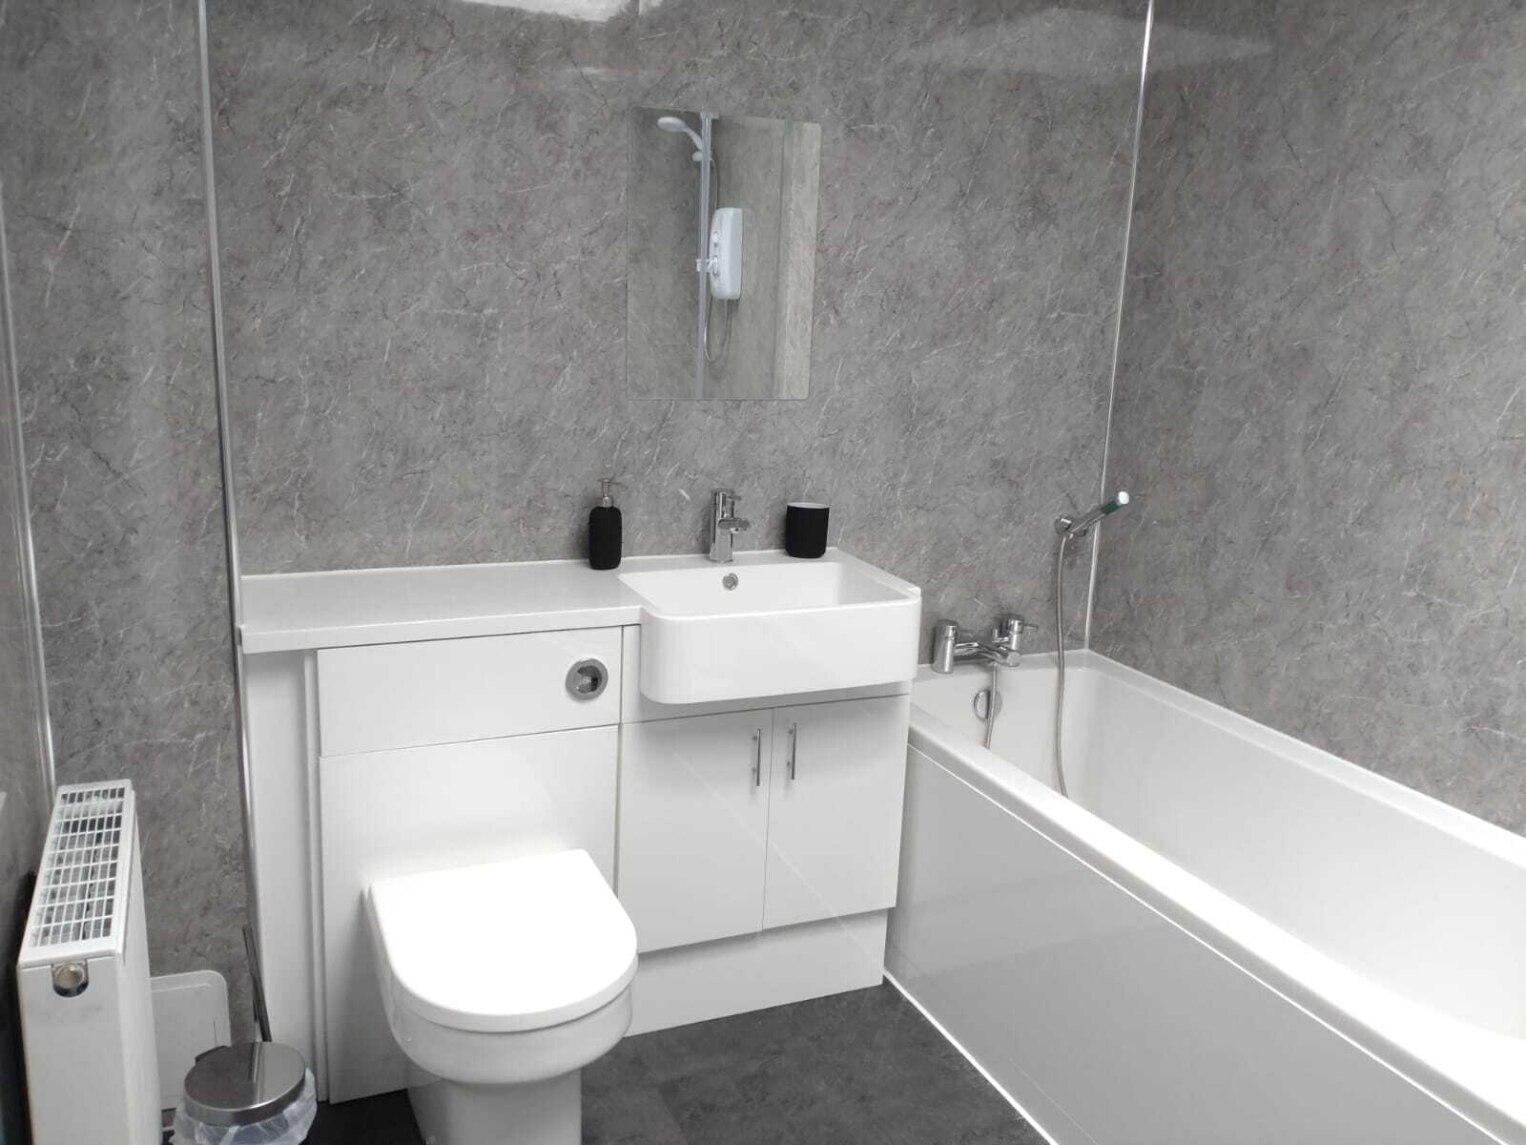 New bathroom fitted by Mcroberts